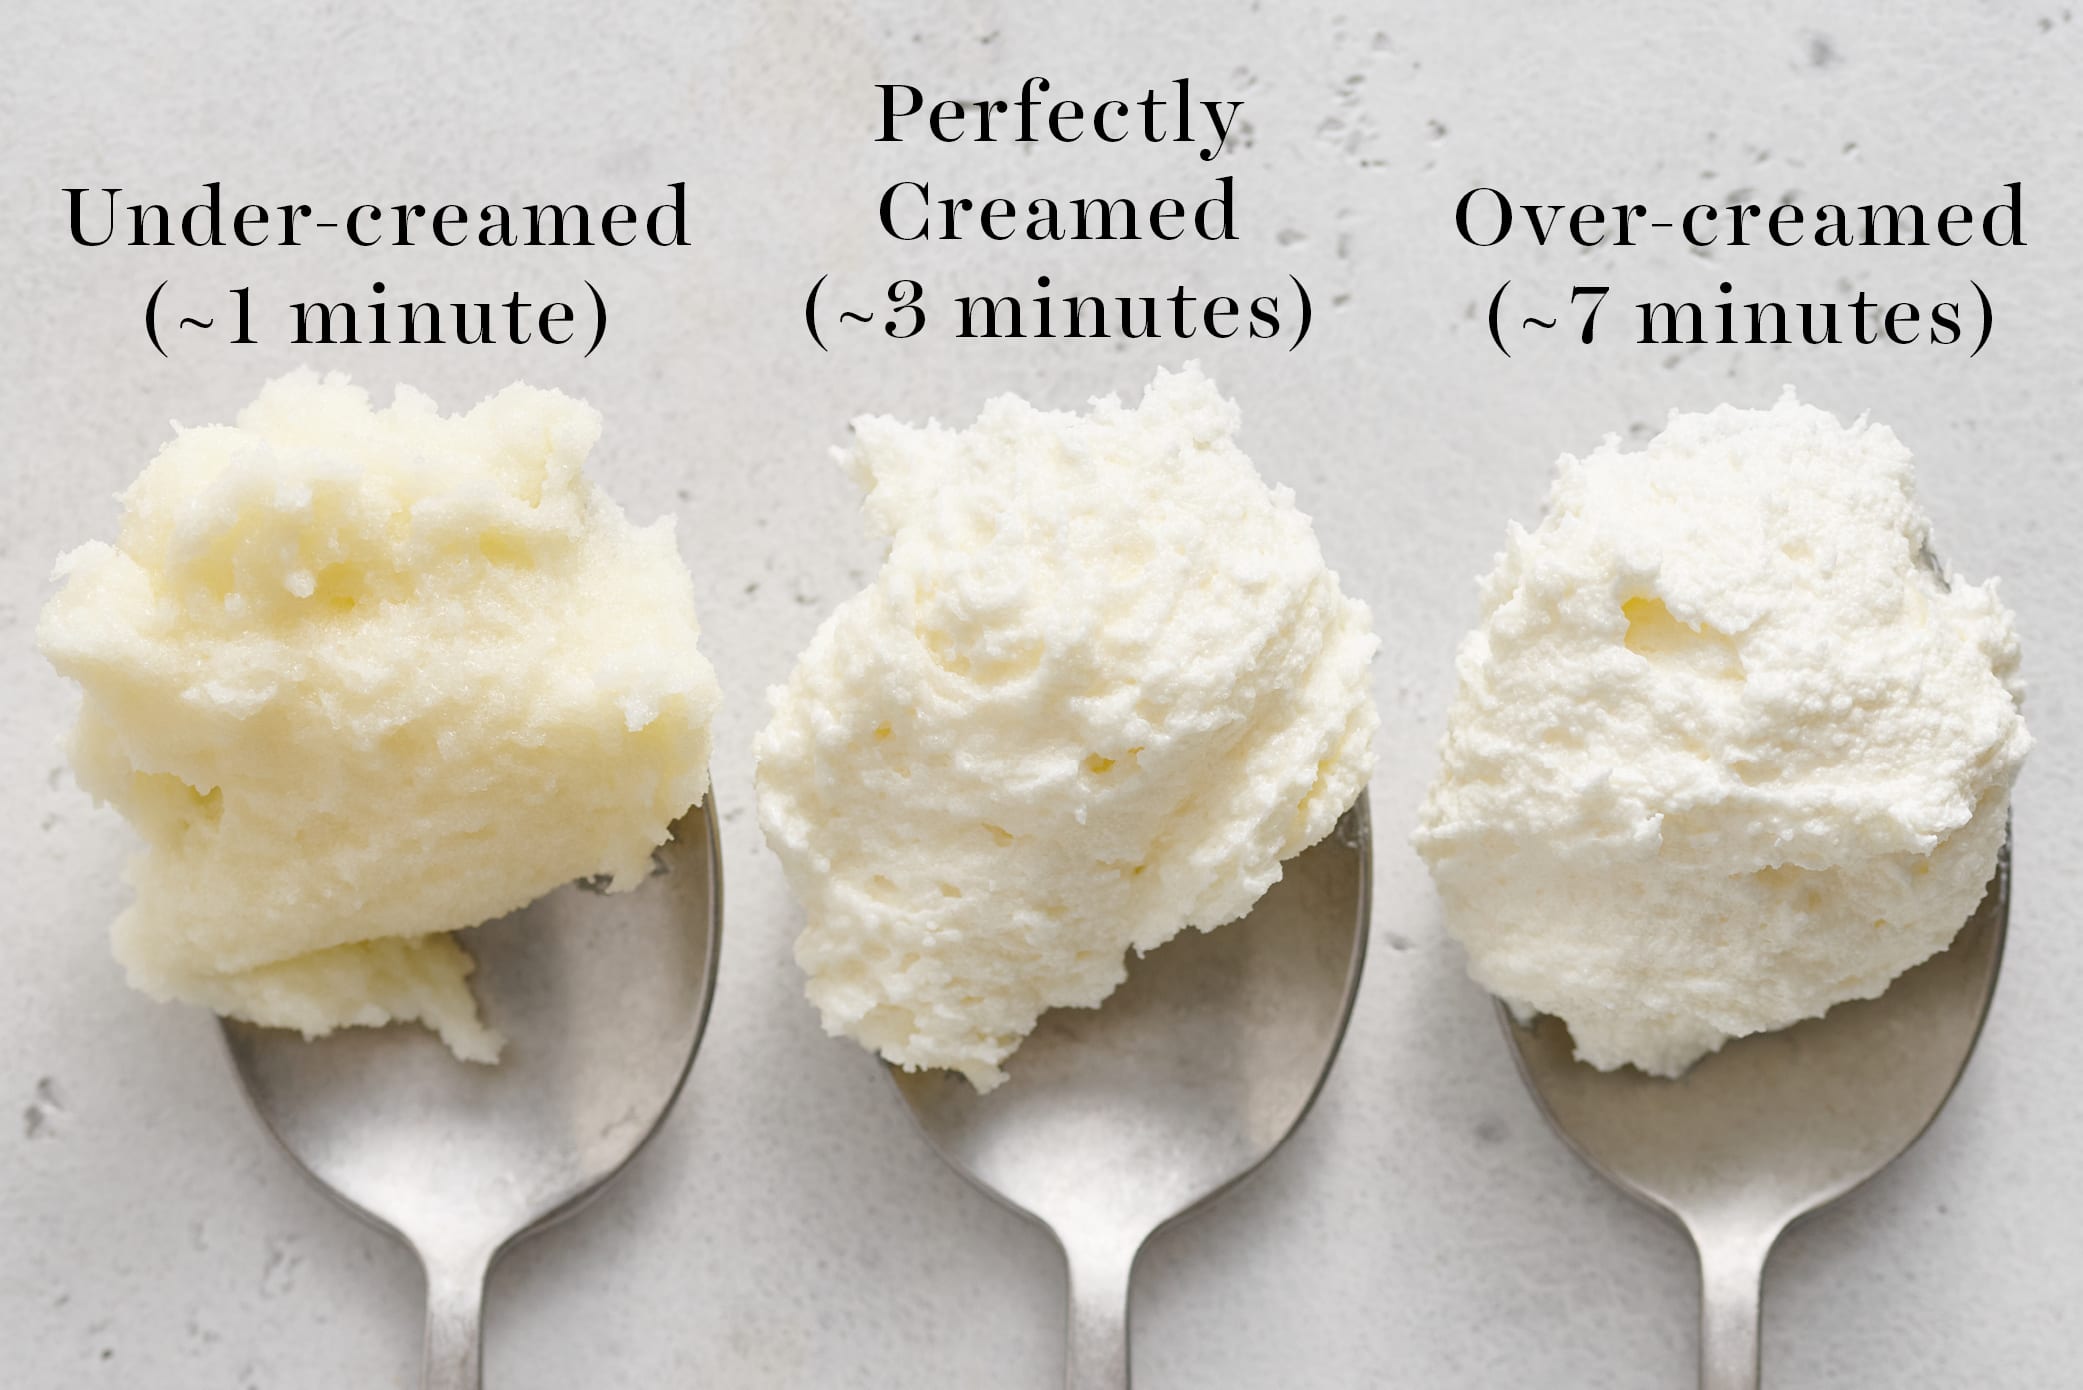 under-creamed, perfectly creamed, and over-creamed butter and sugars on spoons